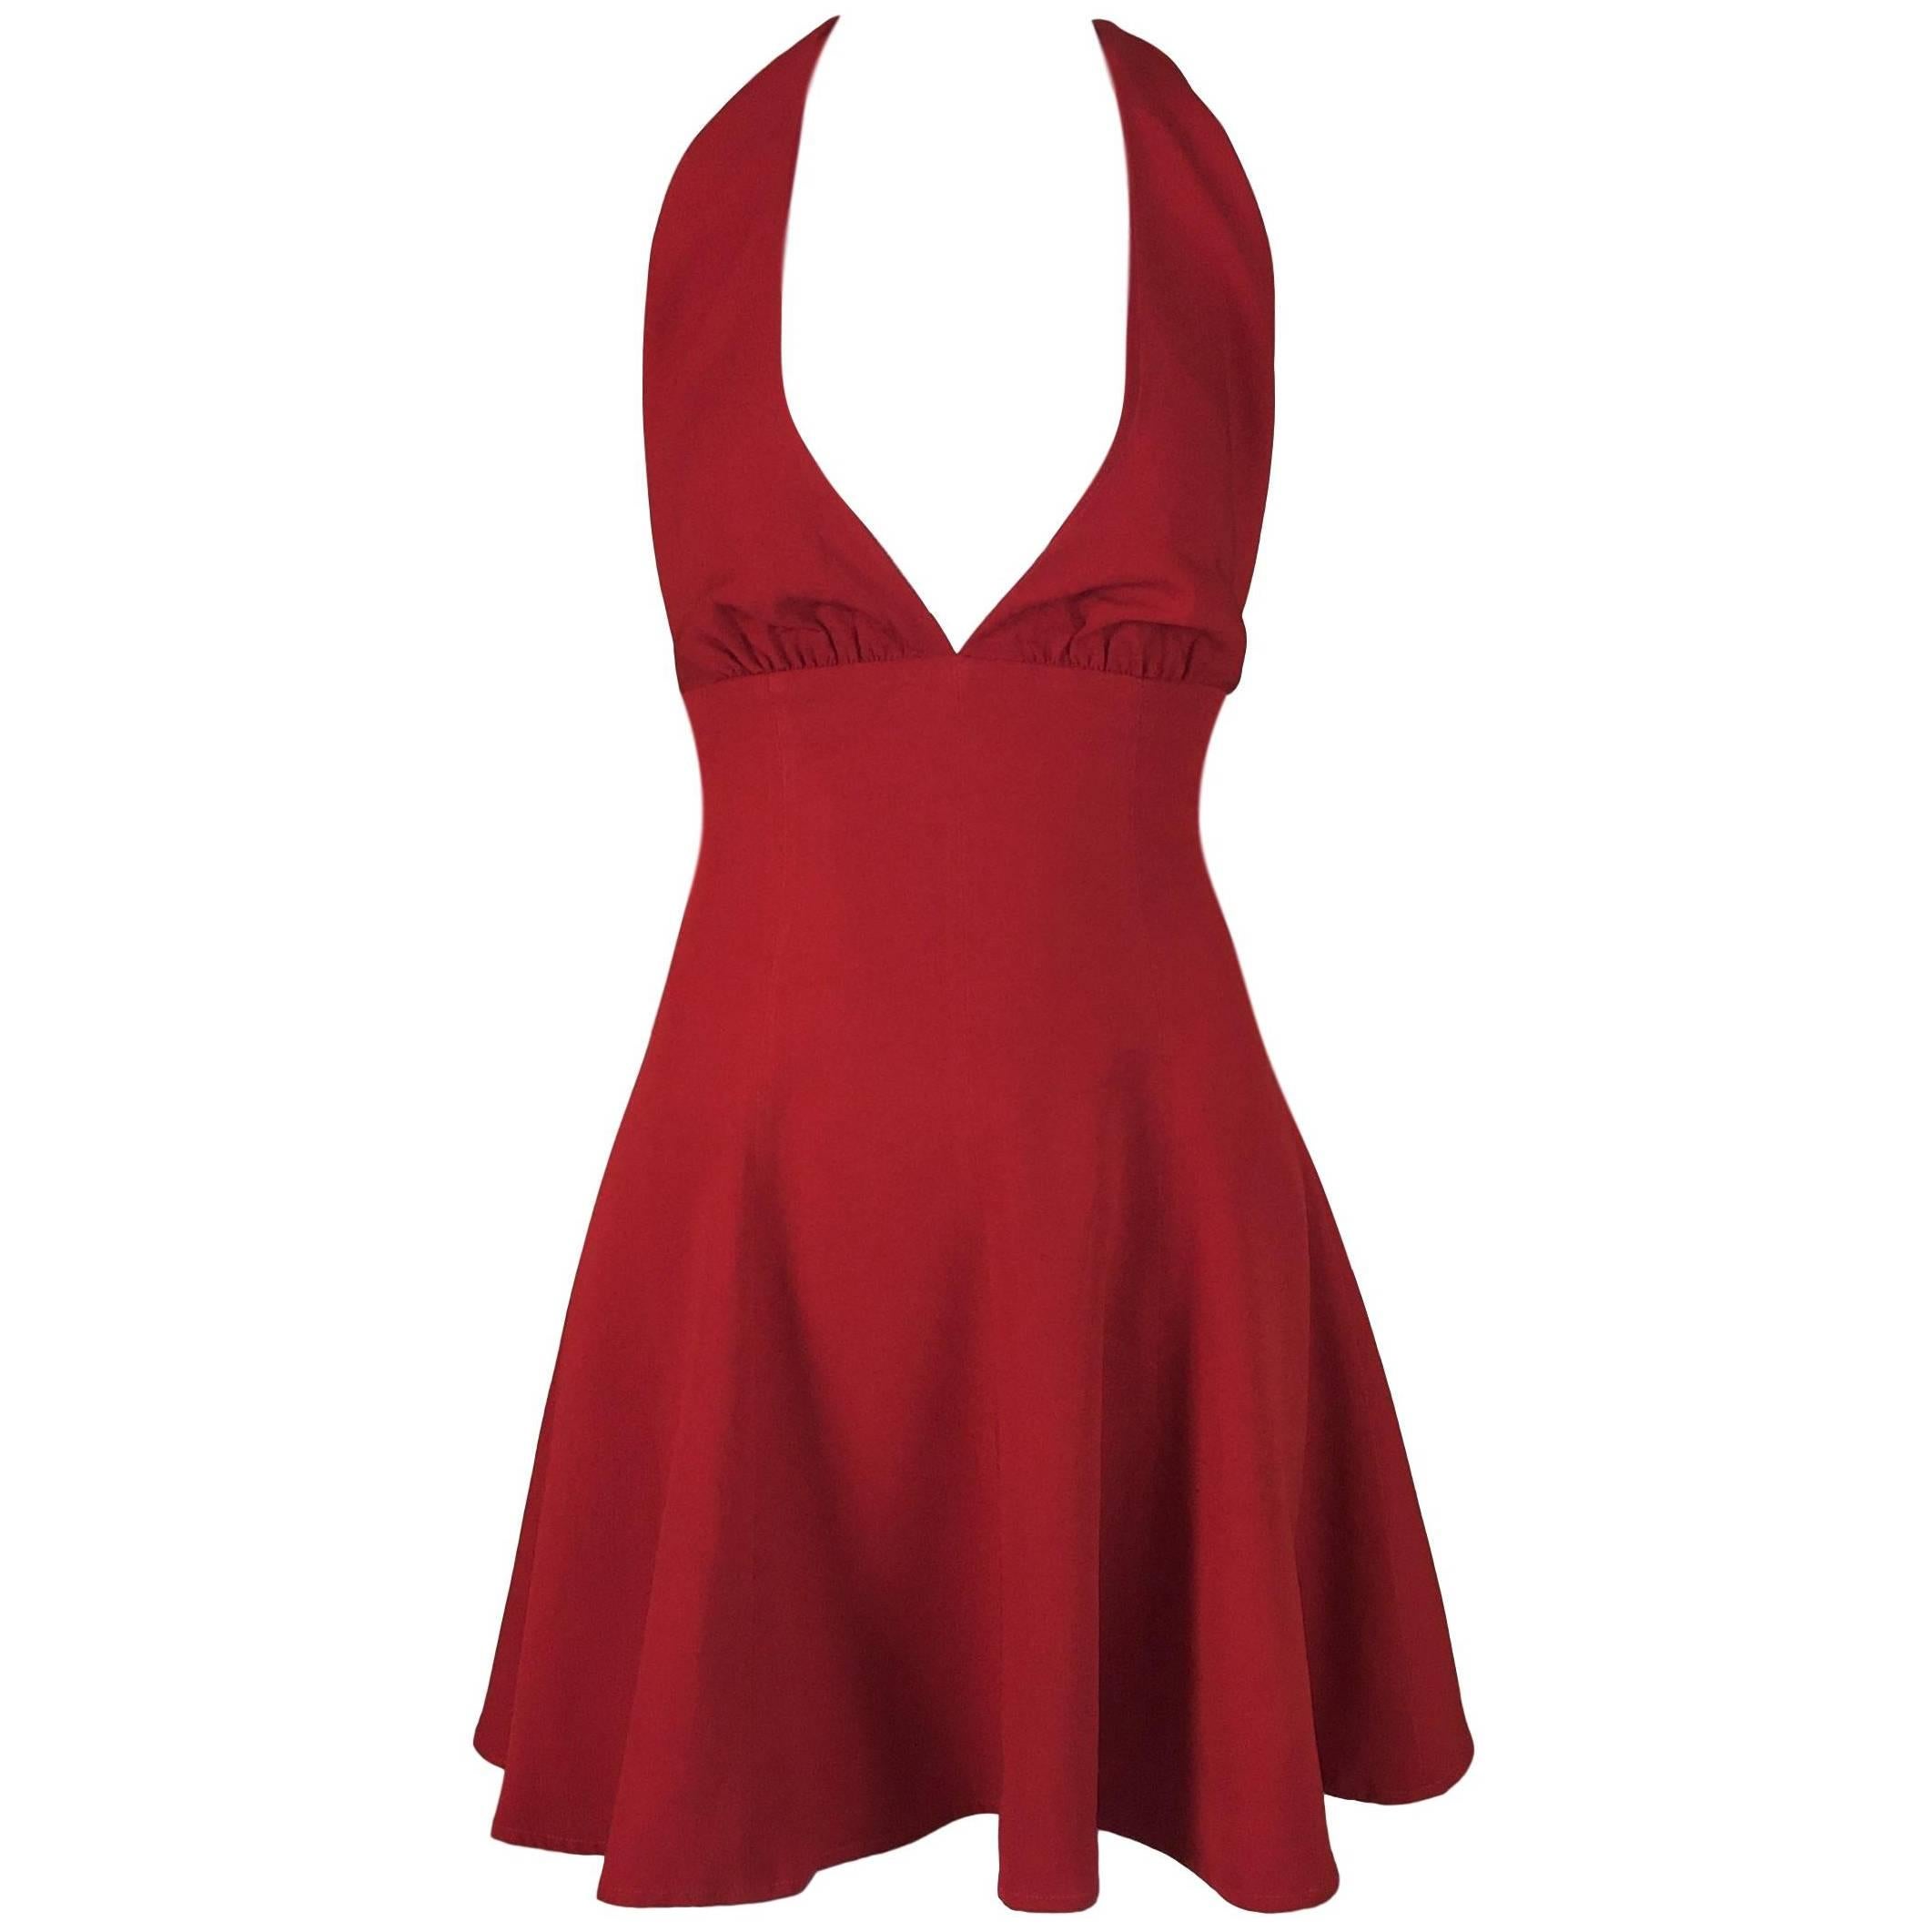 Dolce & Gabbana Red Plunging Marilyn Micro Mini Dress, S / S 1995 